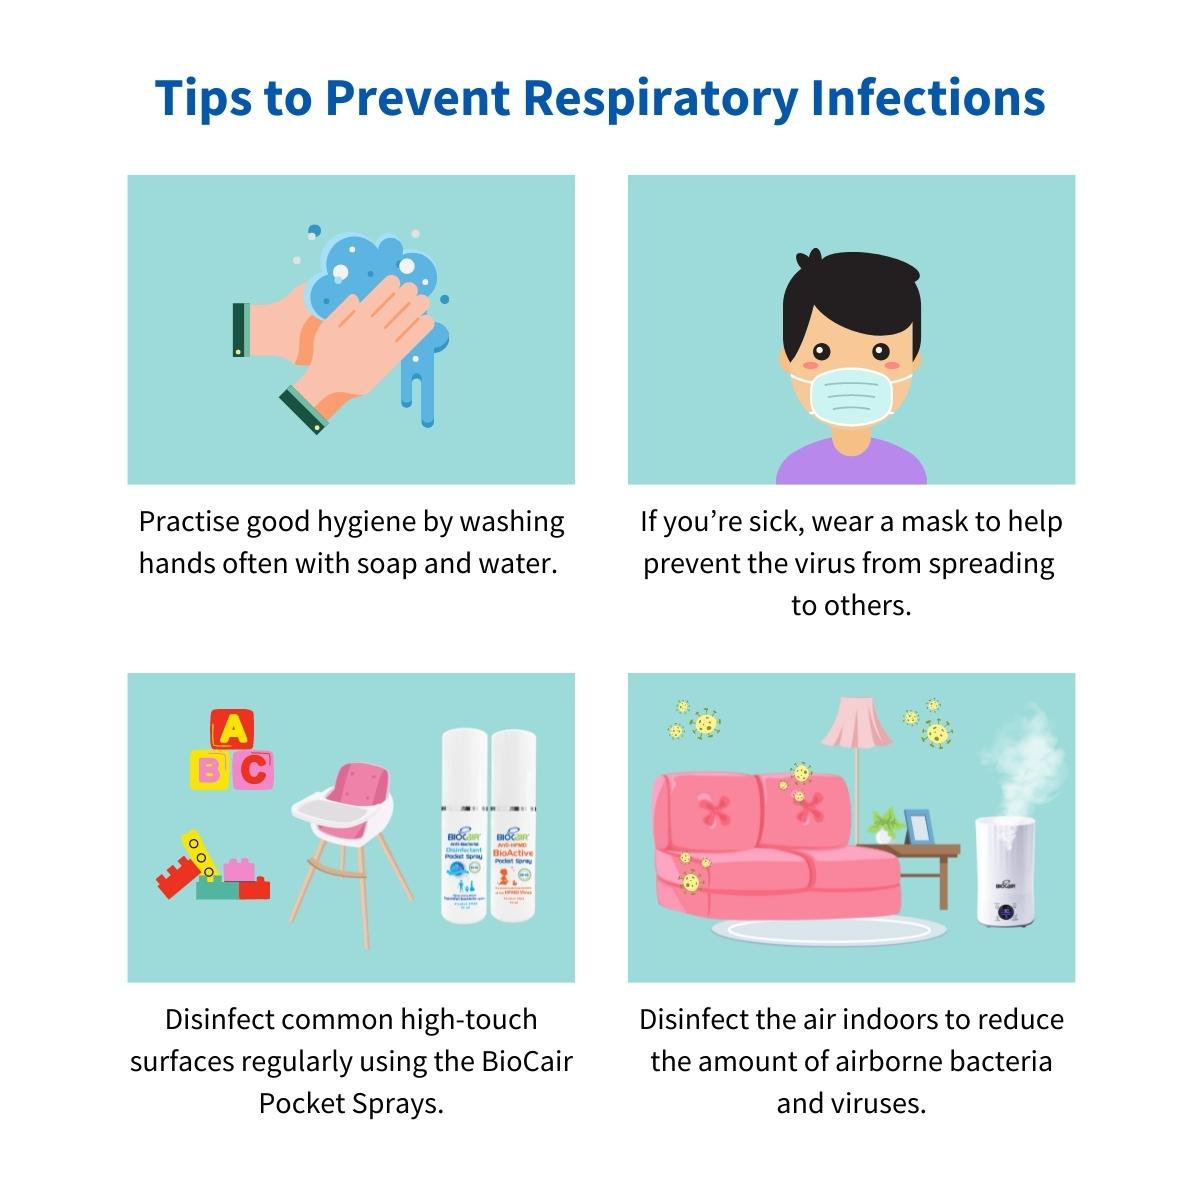 Tips to prevent respiratory infections